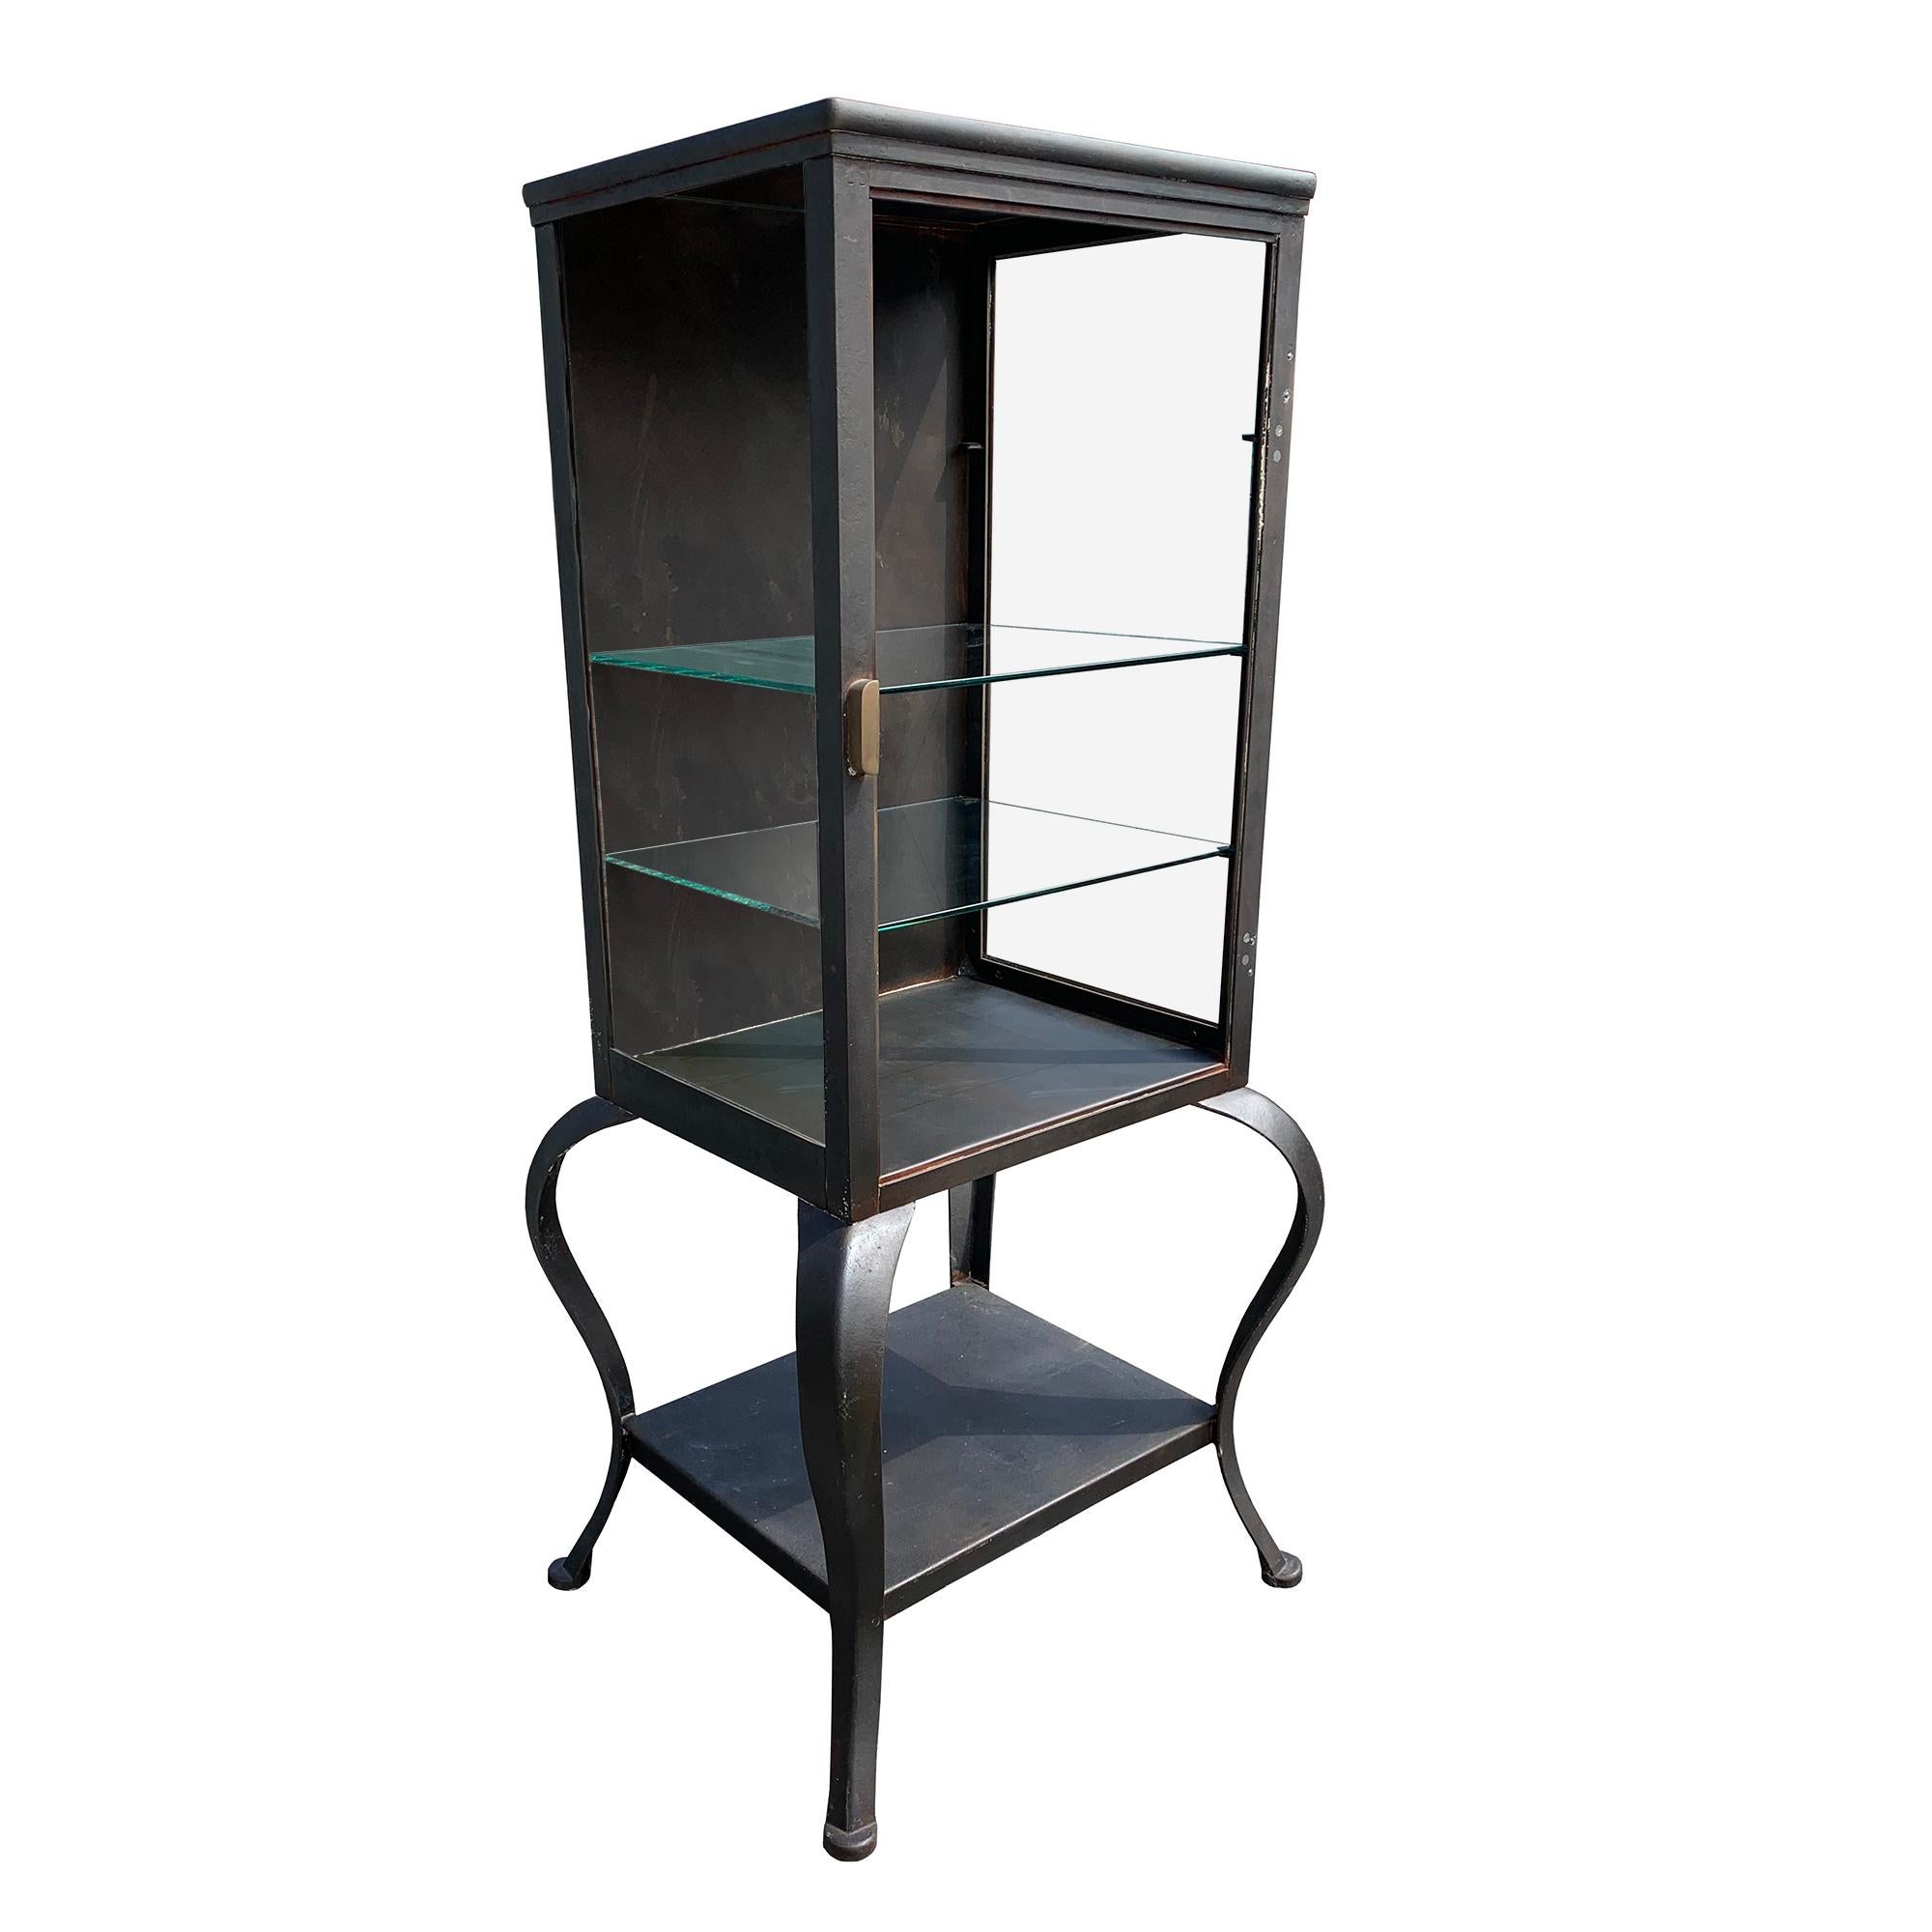 1920s steel medical glass cabinet. This industrial style cabinet includes 2 adjustable glass shelves and a bottom fixed metal shelf. Good rustic condition, this piece is heavy duty steel but is antique and as is, the door was removed at some point